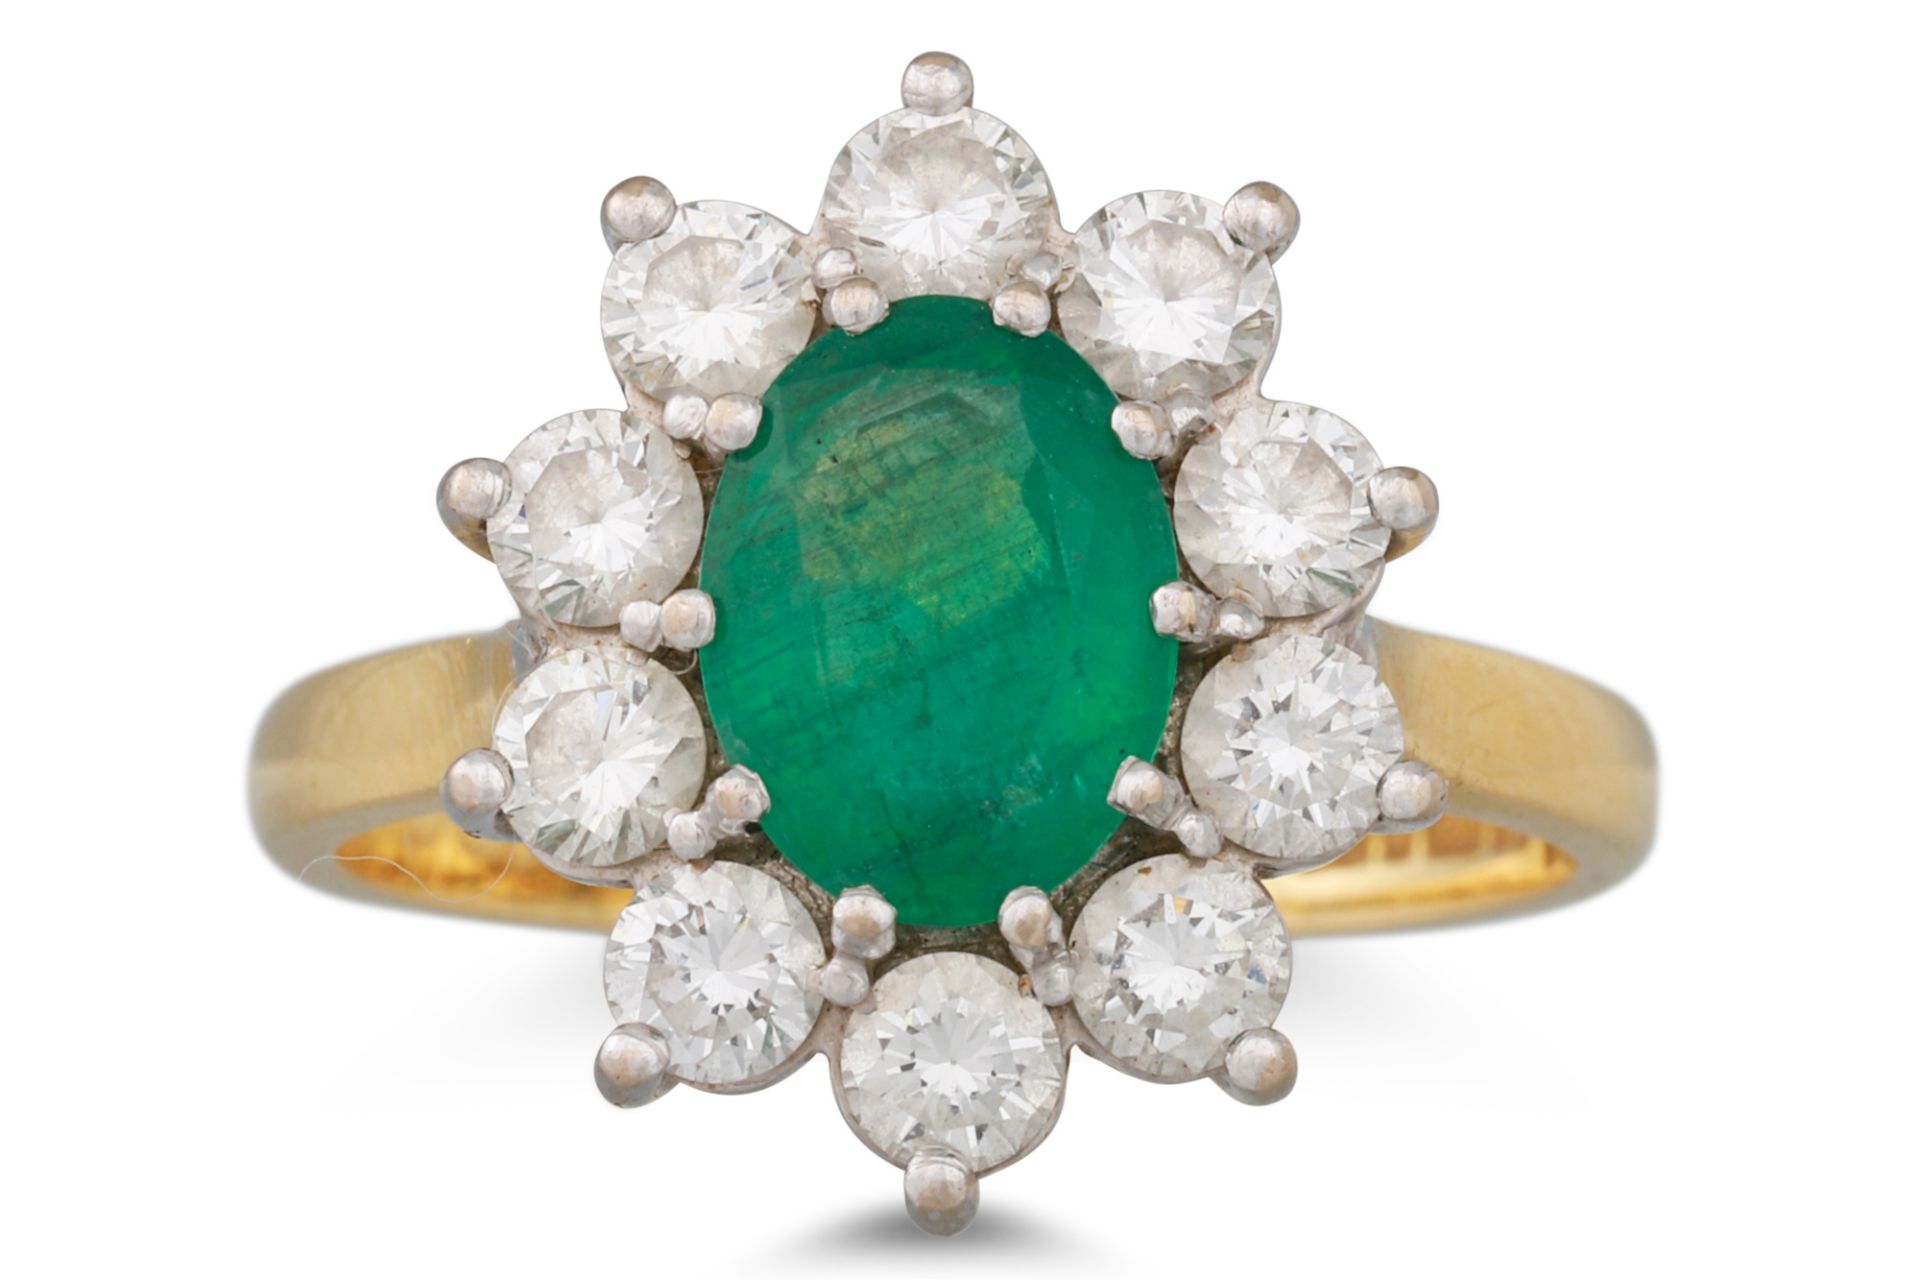 AN EMERALD AND DIAMOND CLUSTER RING, the oval emerald to a brilliant cut diamond surround, mounted